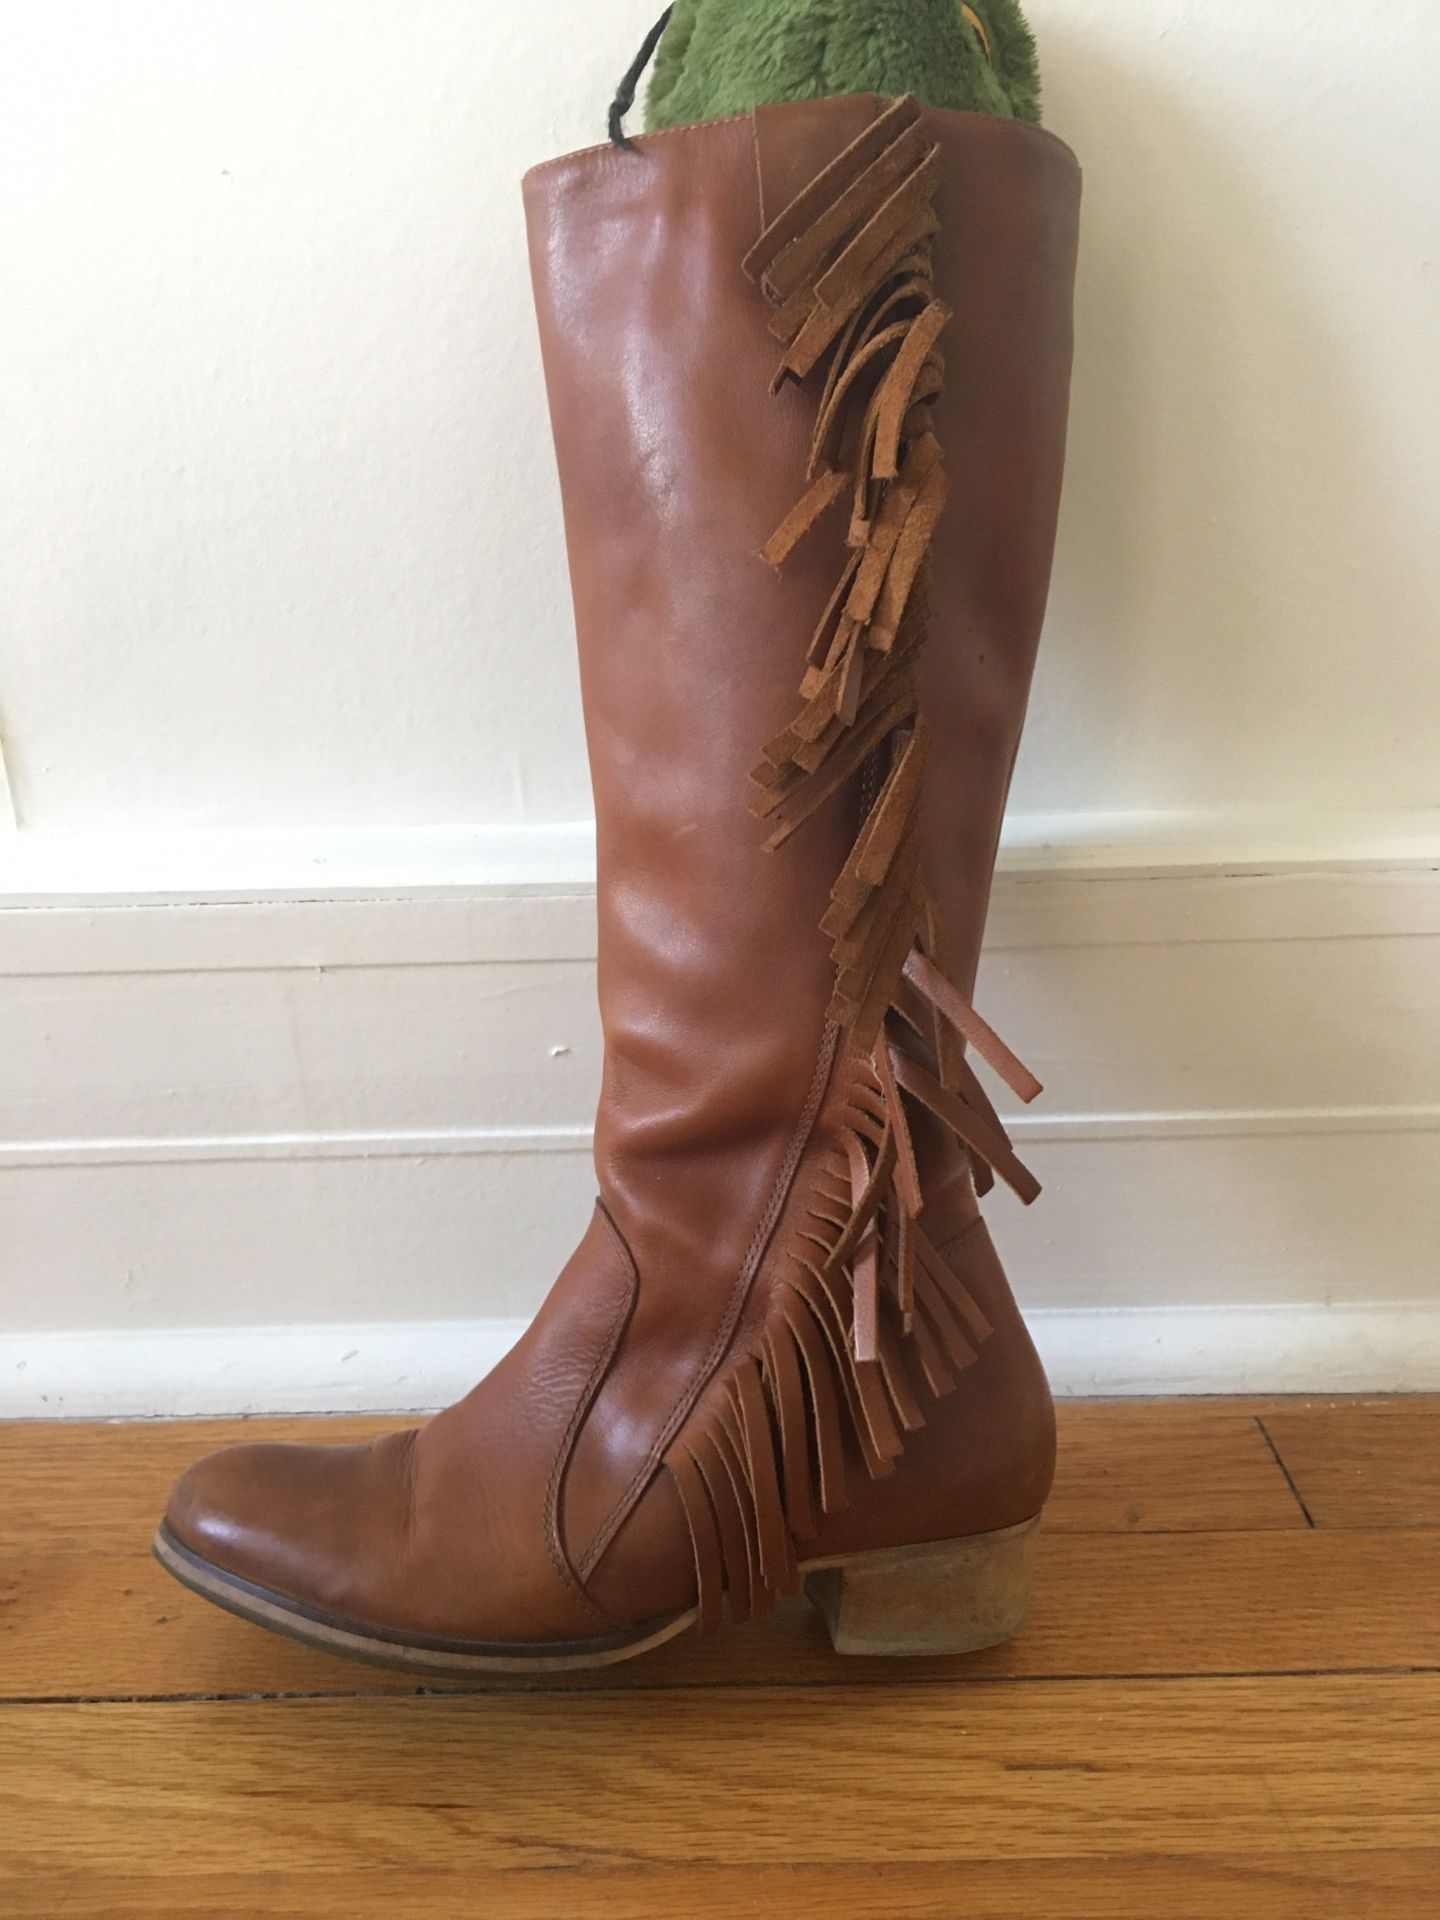 US 7 / EUR 37 Leather Riding Boots with Fringe